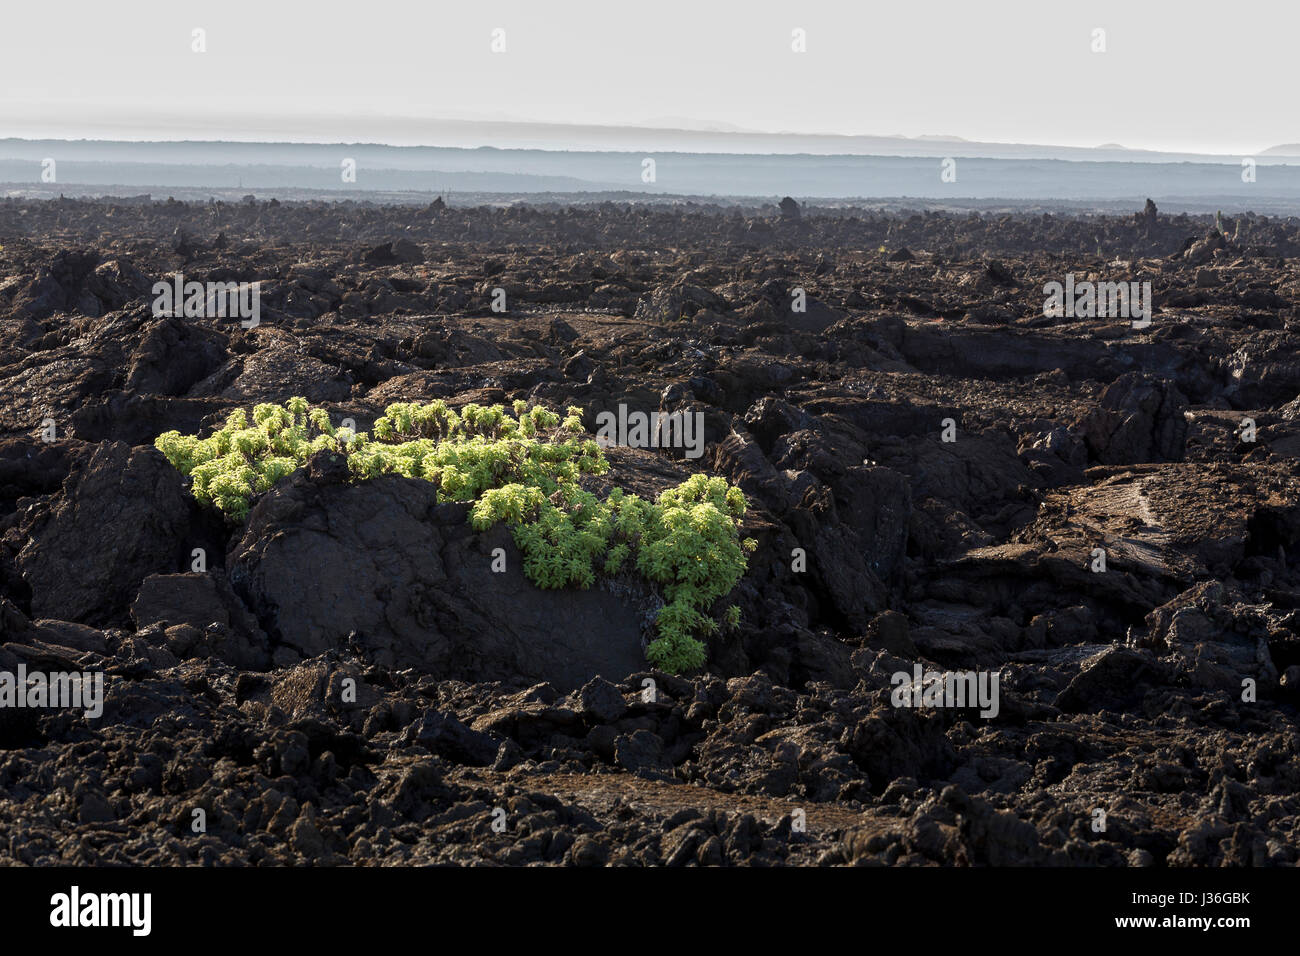 The first settler: a pioneer species of scalesia, the radiate-headed scalesia (Scalesia affinis) on lava floes at Punta Moreno, Isabela. Stock Photo